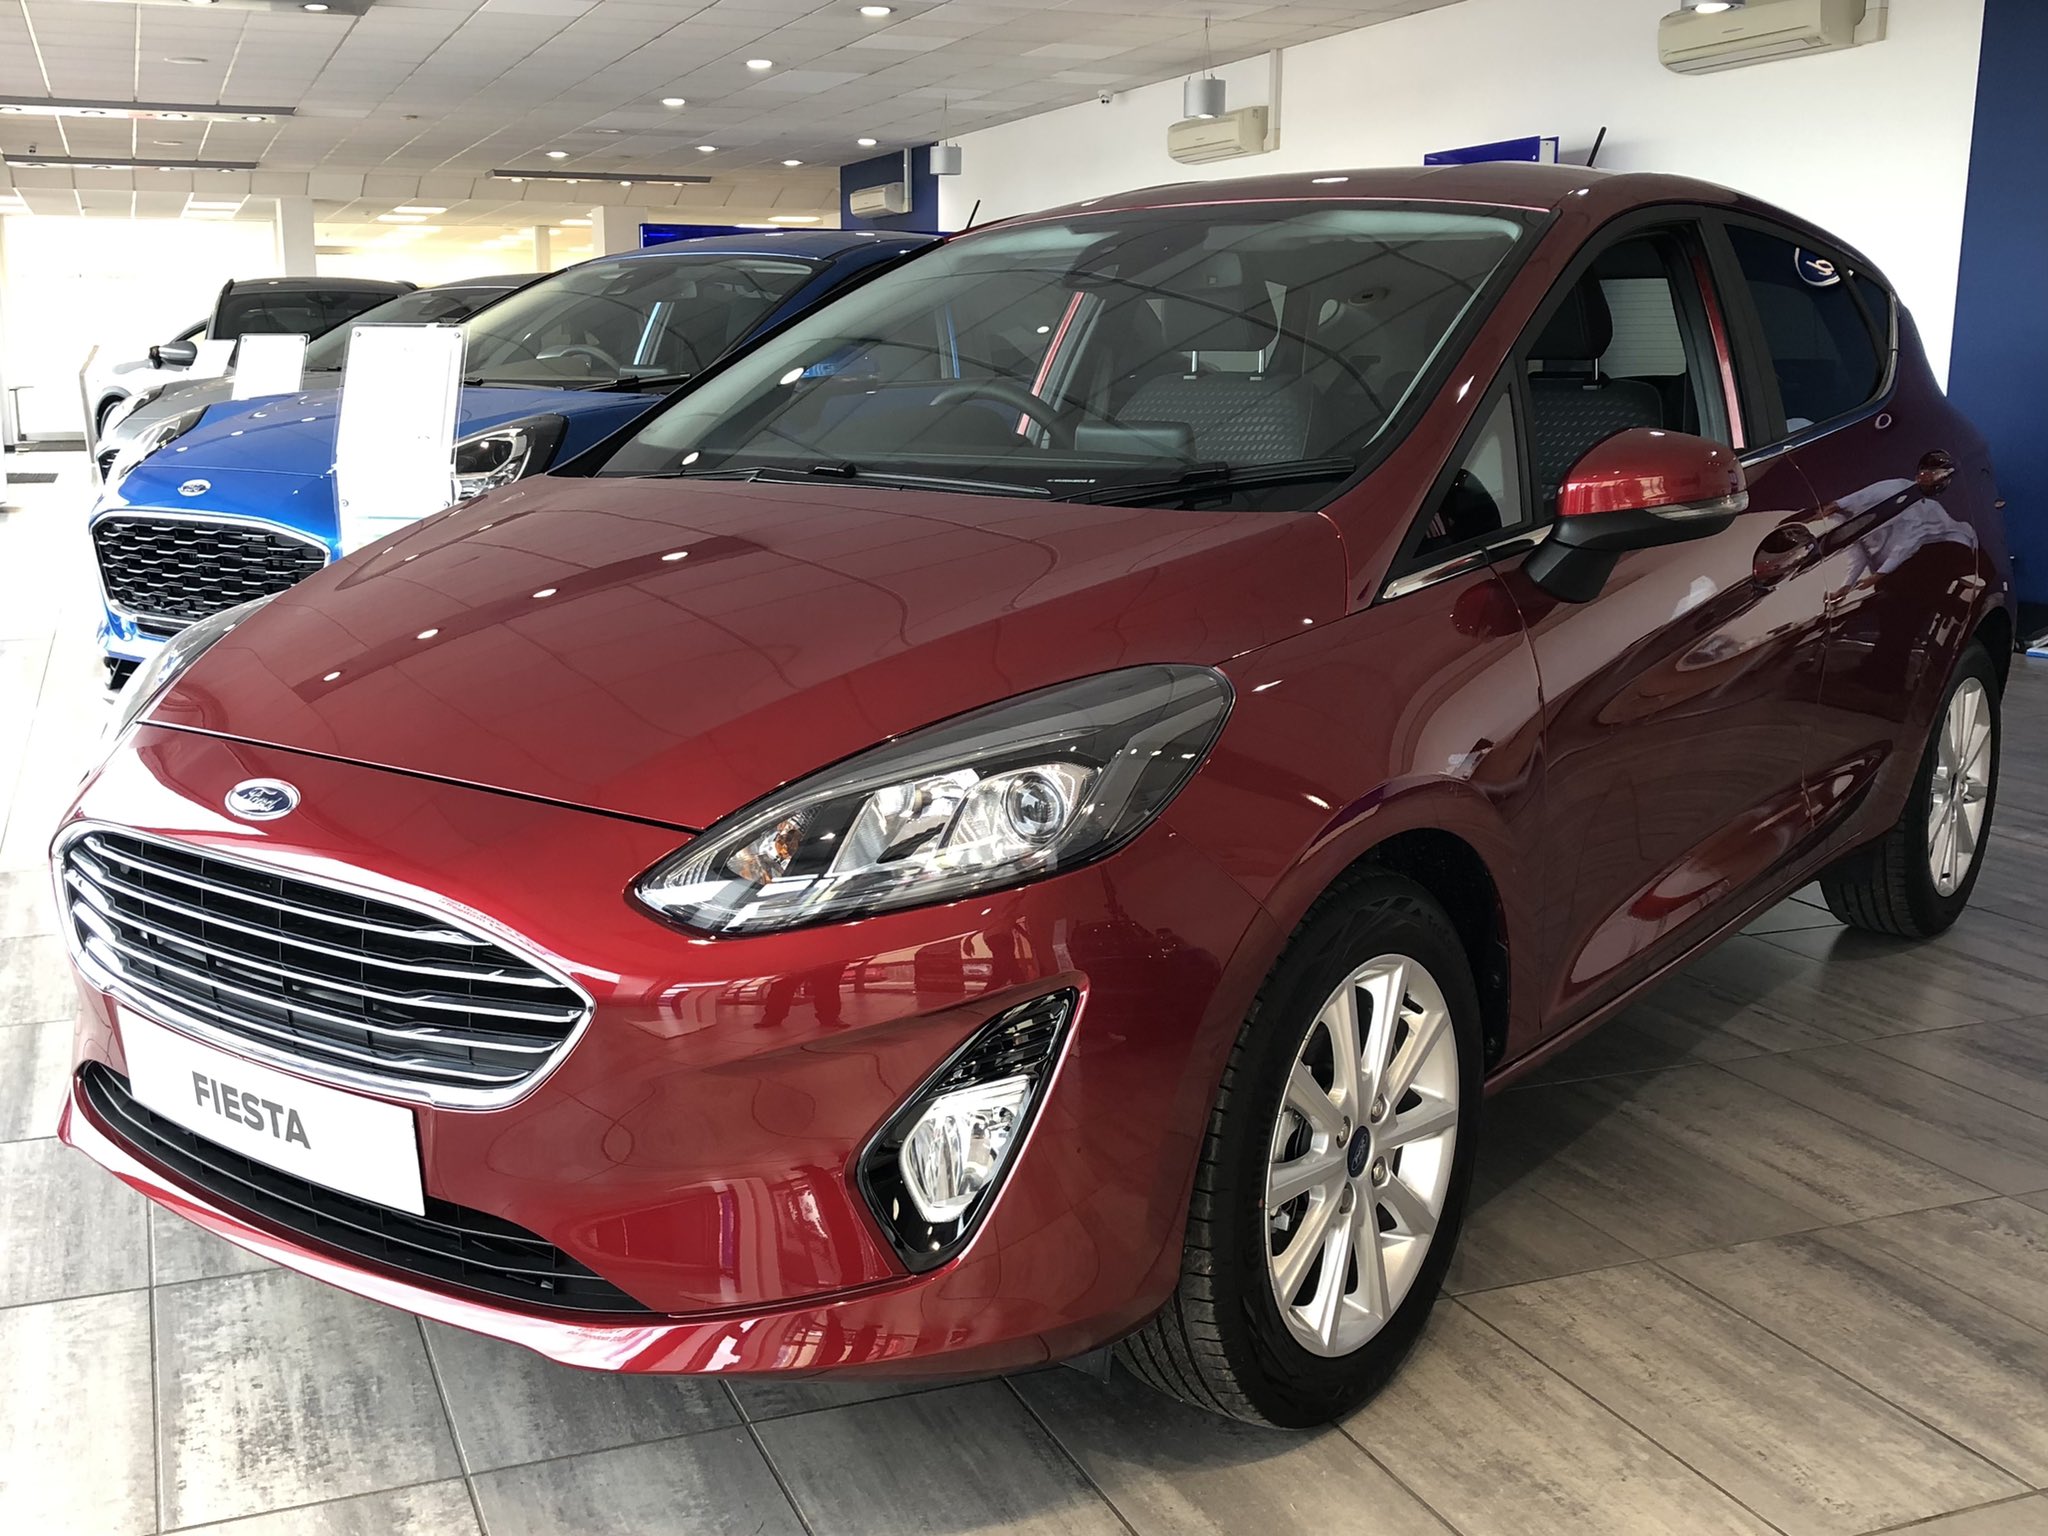 Ford on Twitter: "We now have this beautiful Ruby Red Fiesta Titanium MHEV in our showroom! If you're in the market for a New Fiesta right now, this one has to